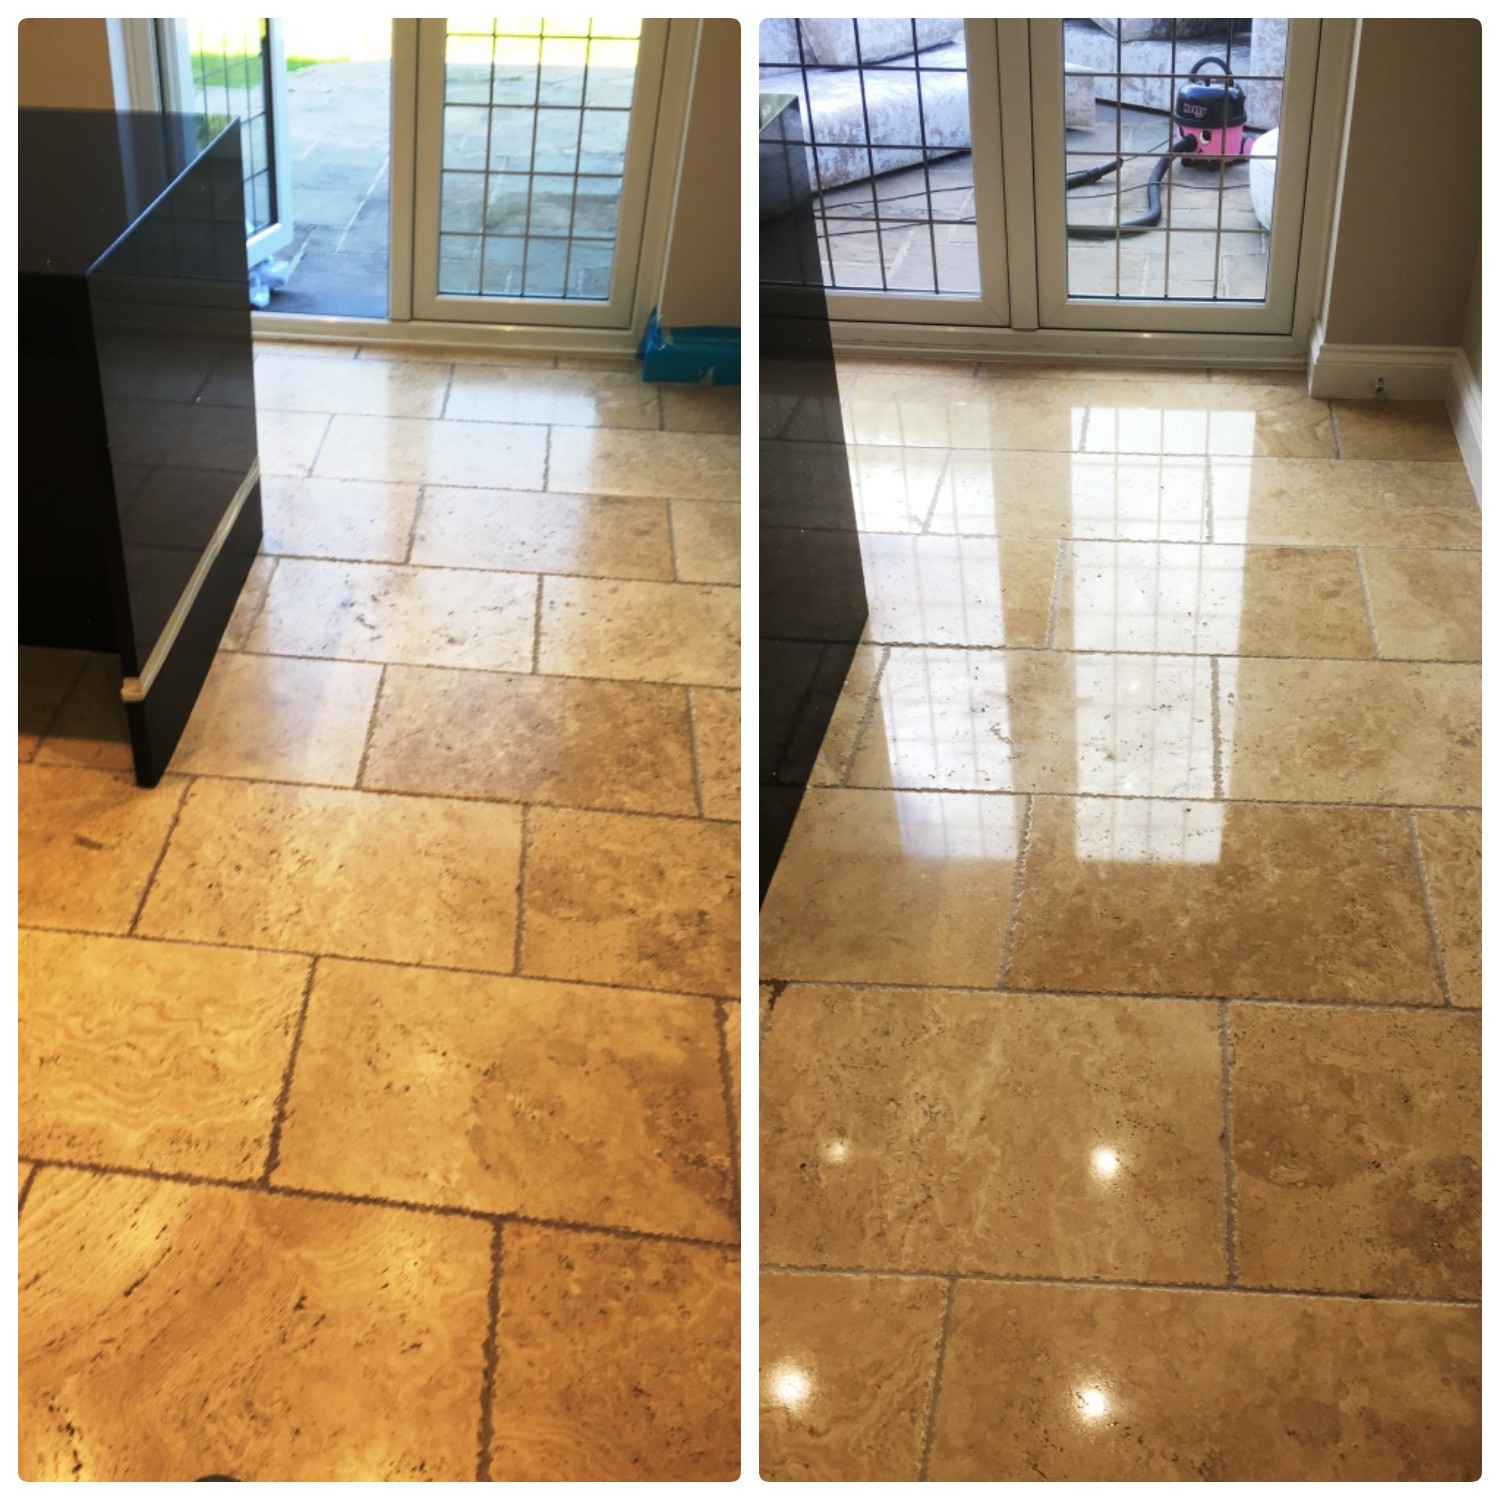 travertine floors before and after